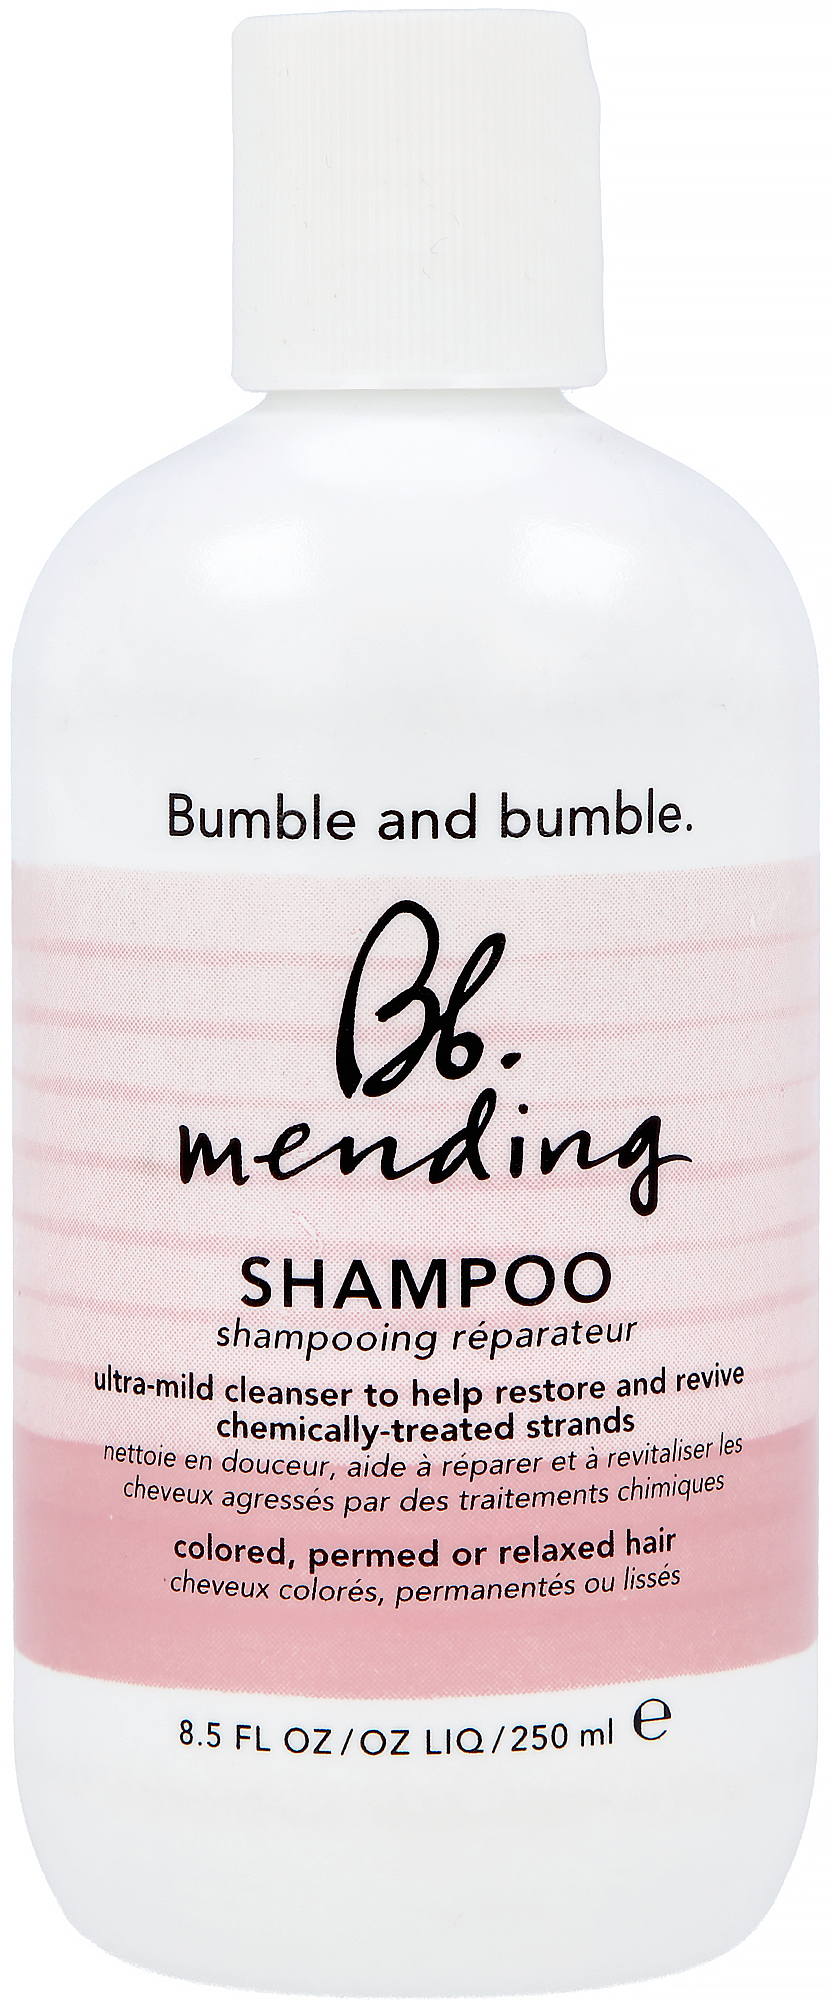 Bumble and bumble Medning Shampoo 250ml